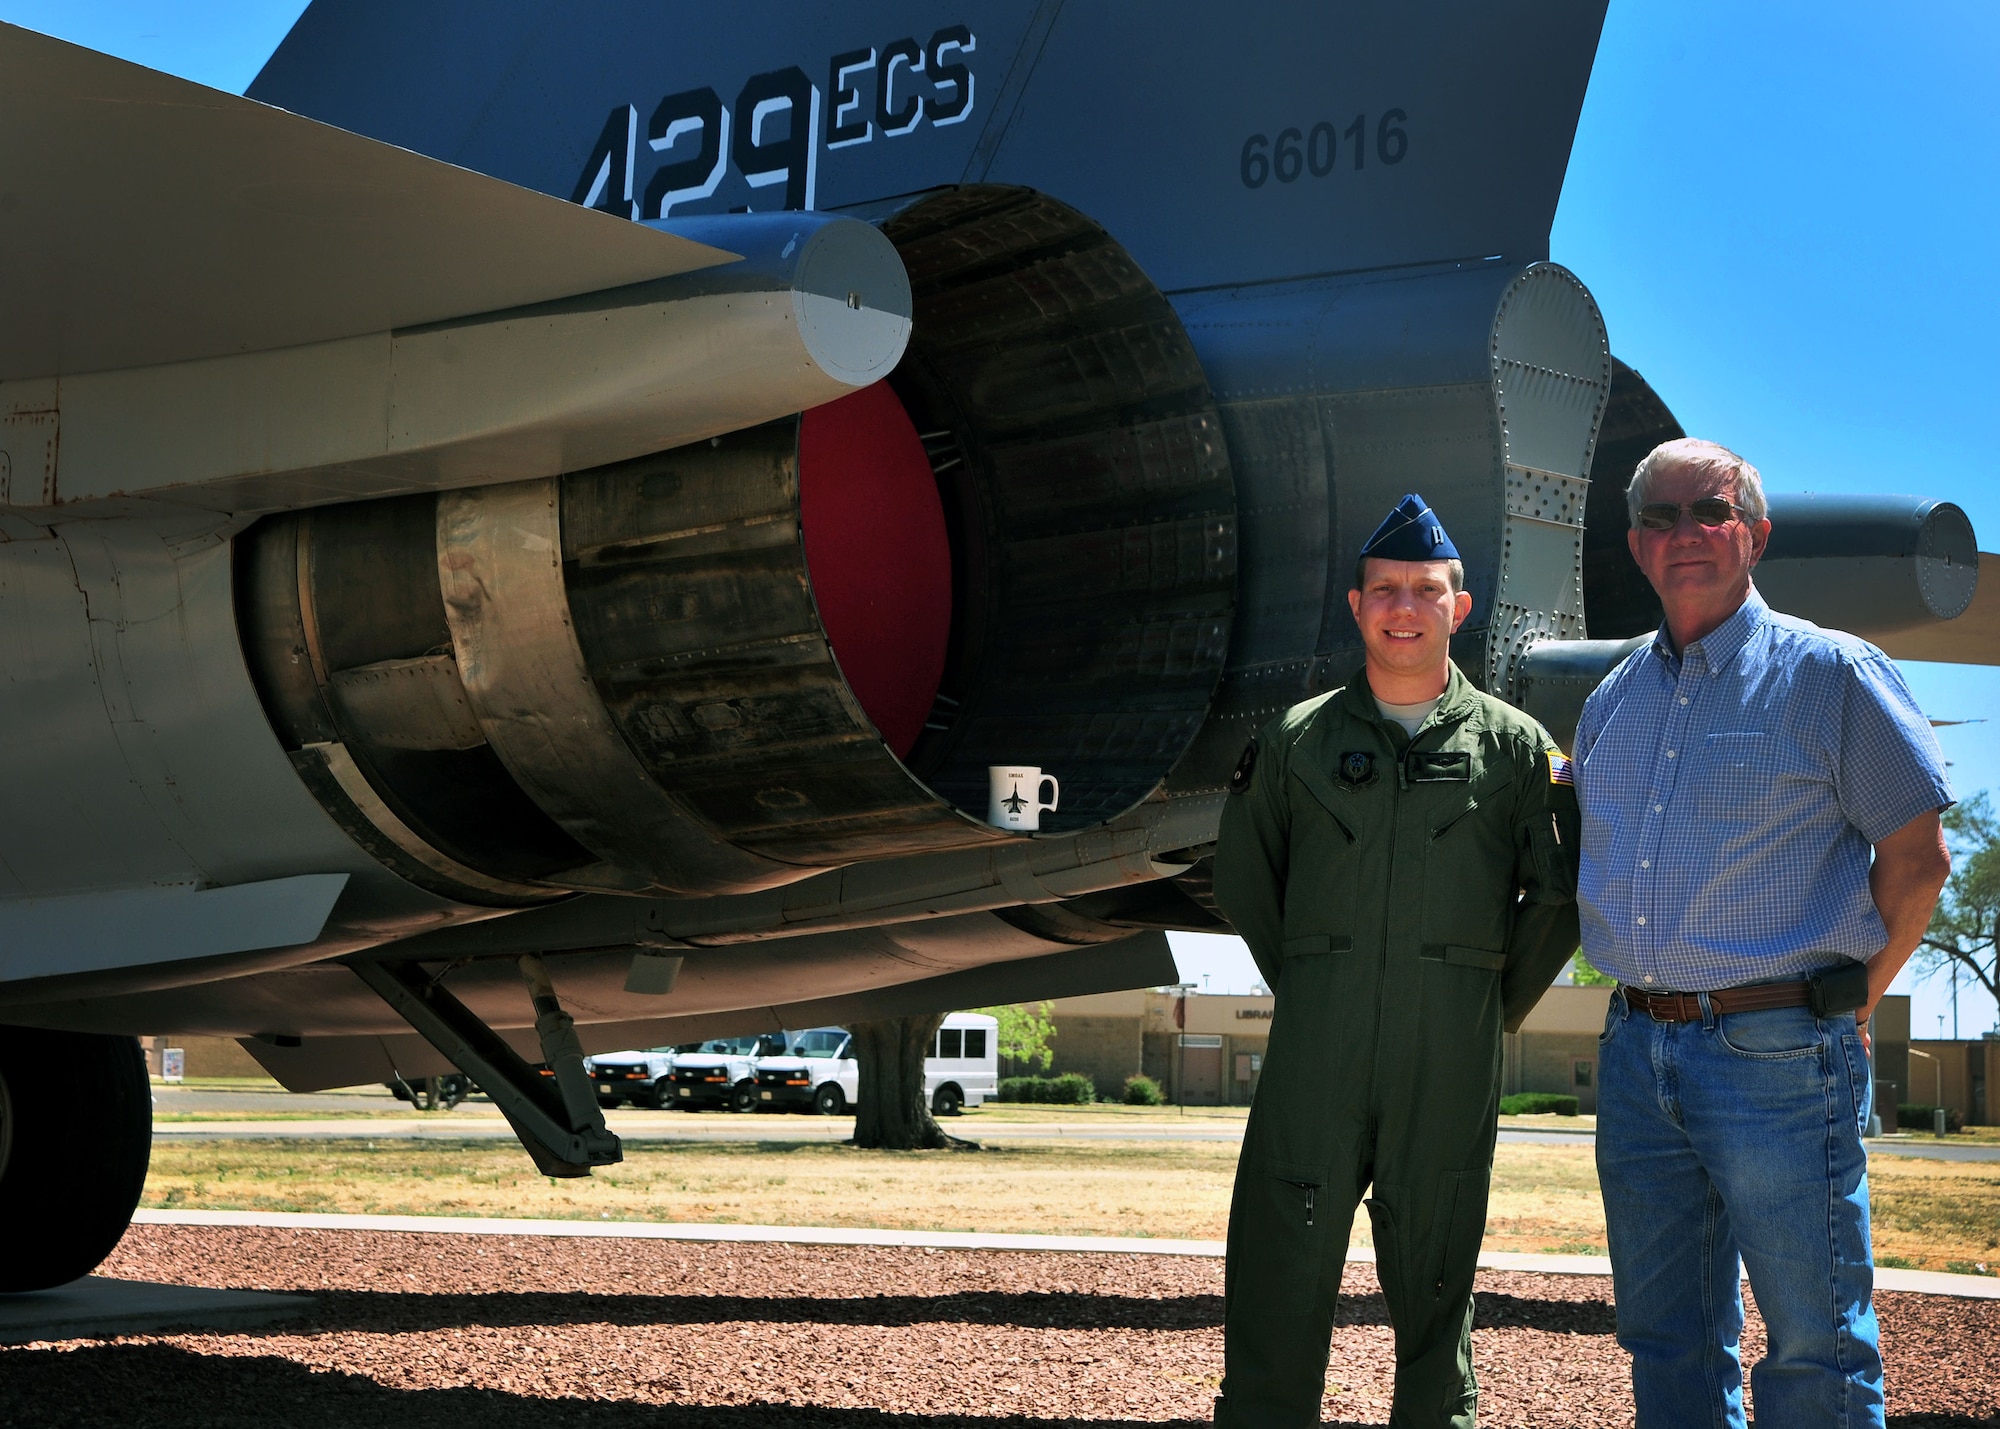 Capt. Christopher Smoak and his father, Cameron Smoak, stand next to an F-111A Aardvark display May 9, 2014, at Cannon Air Force Base, N.M. Cameron crewed the airframe during the 1970s. The father and son searched for the tail numbers Cameron was responsible for many years before discovering 66-016 on display at Cannon AFB. Christopher is a pilot with the 318th Special Operations Squadron.  (U.S. Air Force photo/Staff Sgt. Whitney Amstutz)